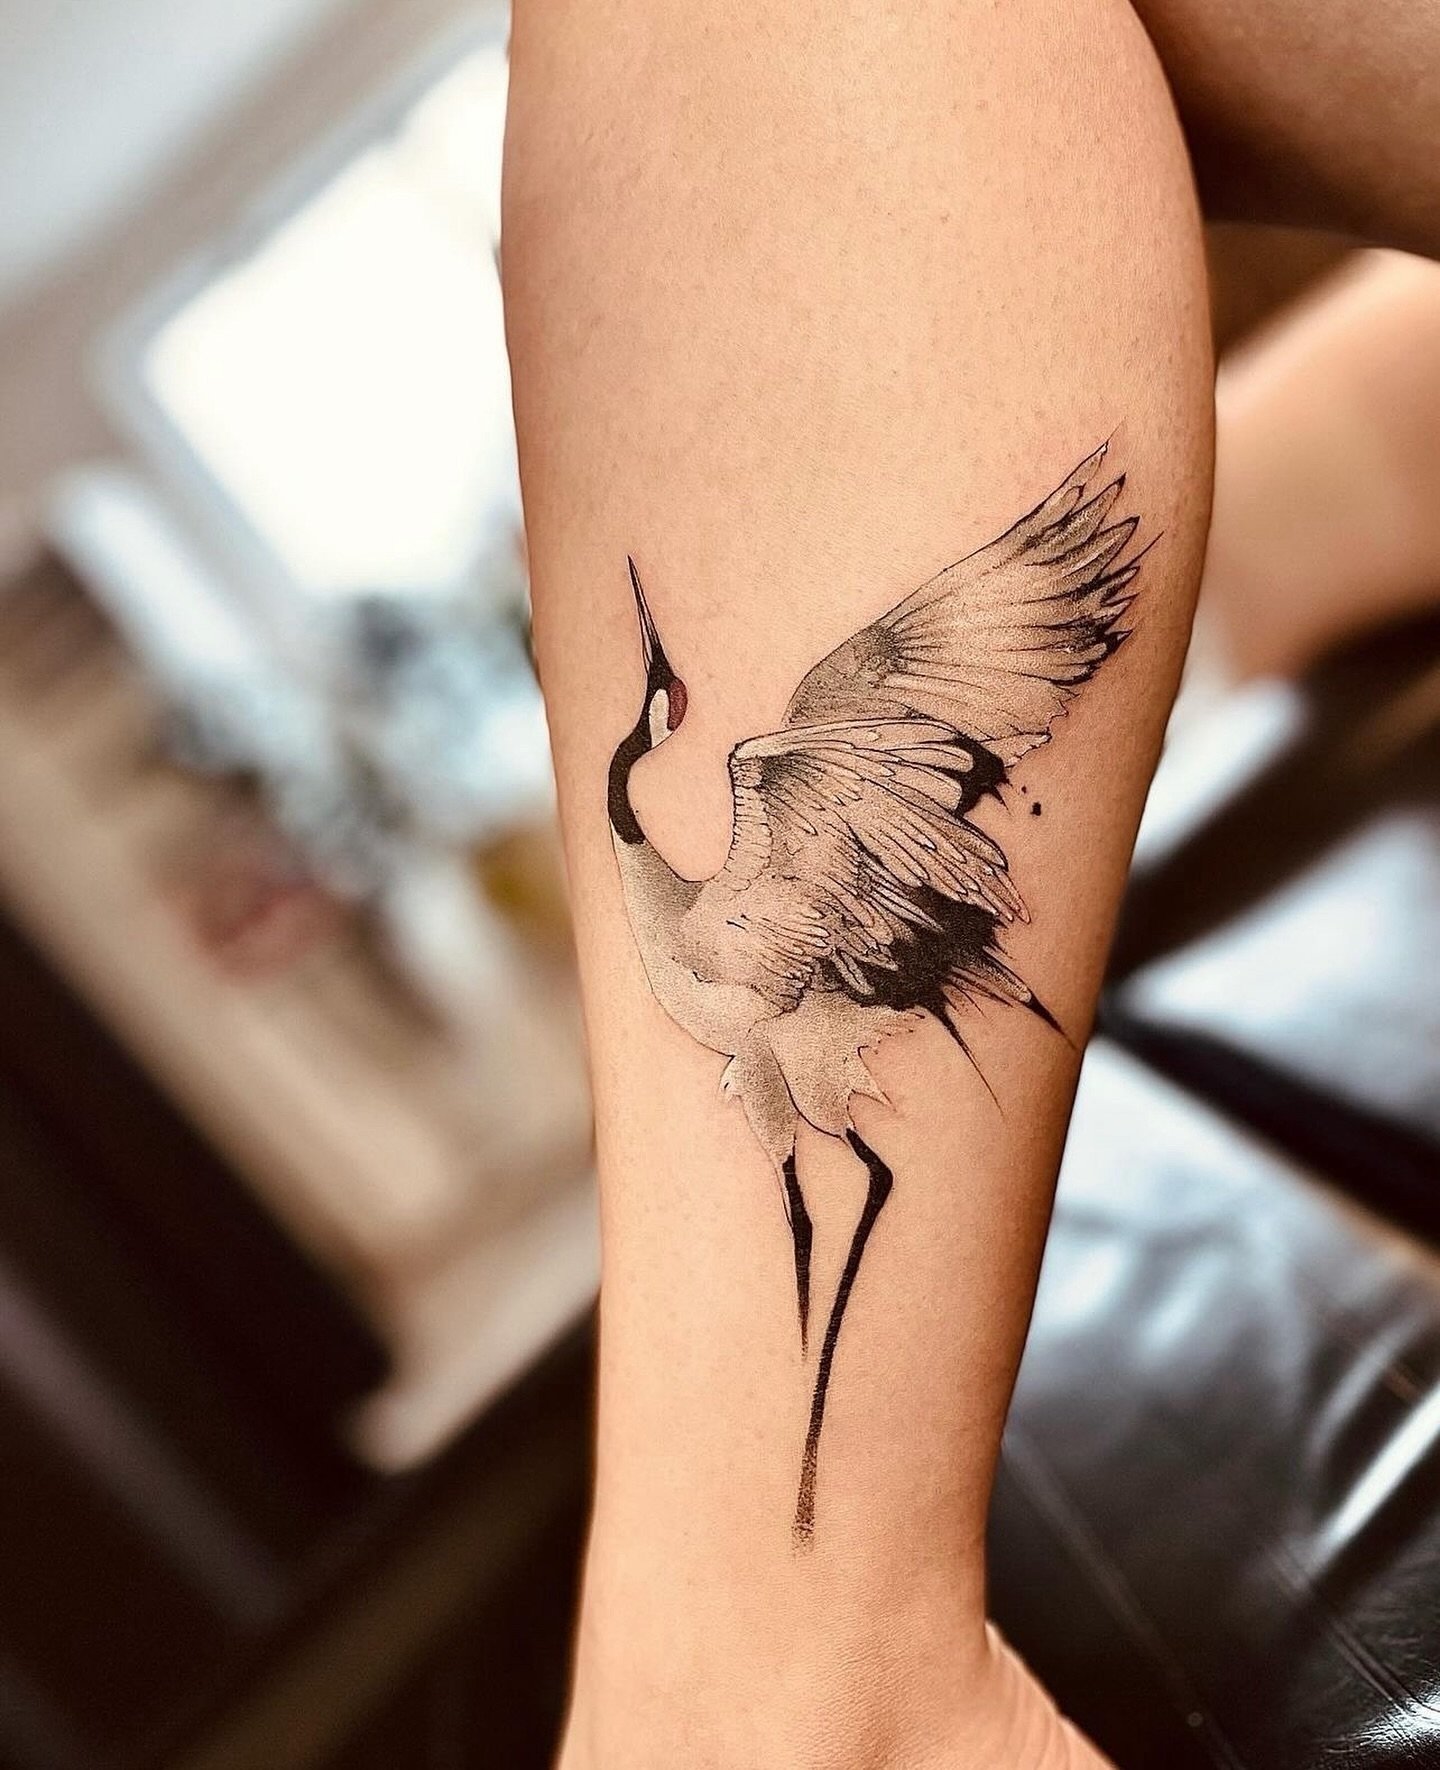 Sumi style crane 🐦
Artist: @n1co_tattoo 
________________________________________________
[At Off the Ground Ink, we bring your tattoo ideas to life! 💭 For bookings and inquiries, reach out to us by email at offthegroundink@gmail.com]
.
.
.
.
.
#ta